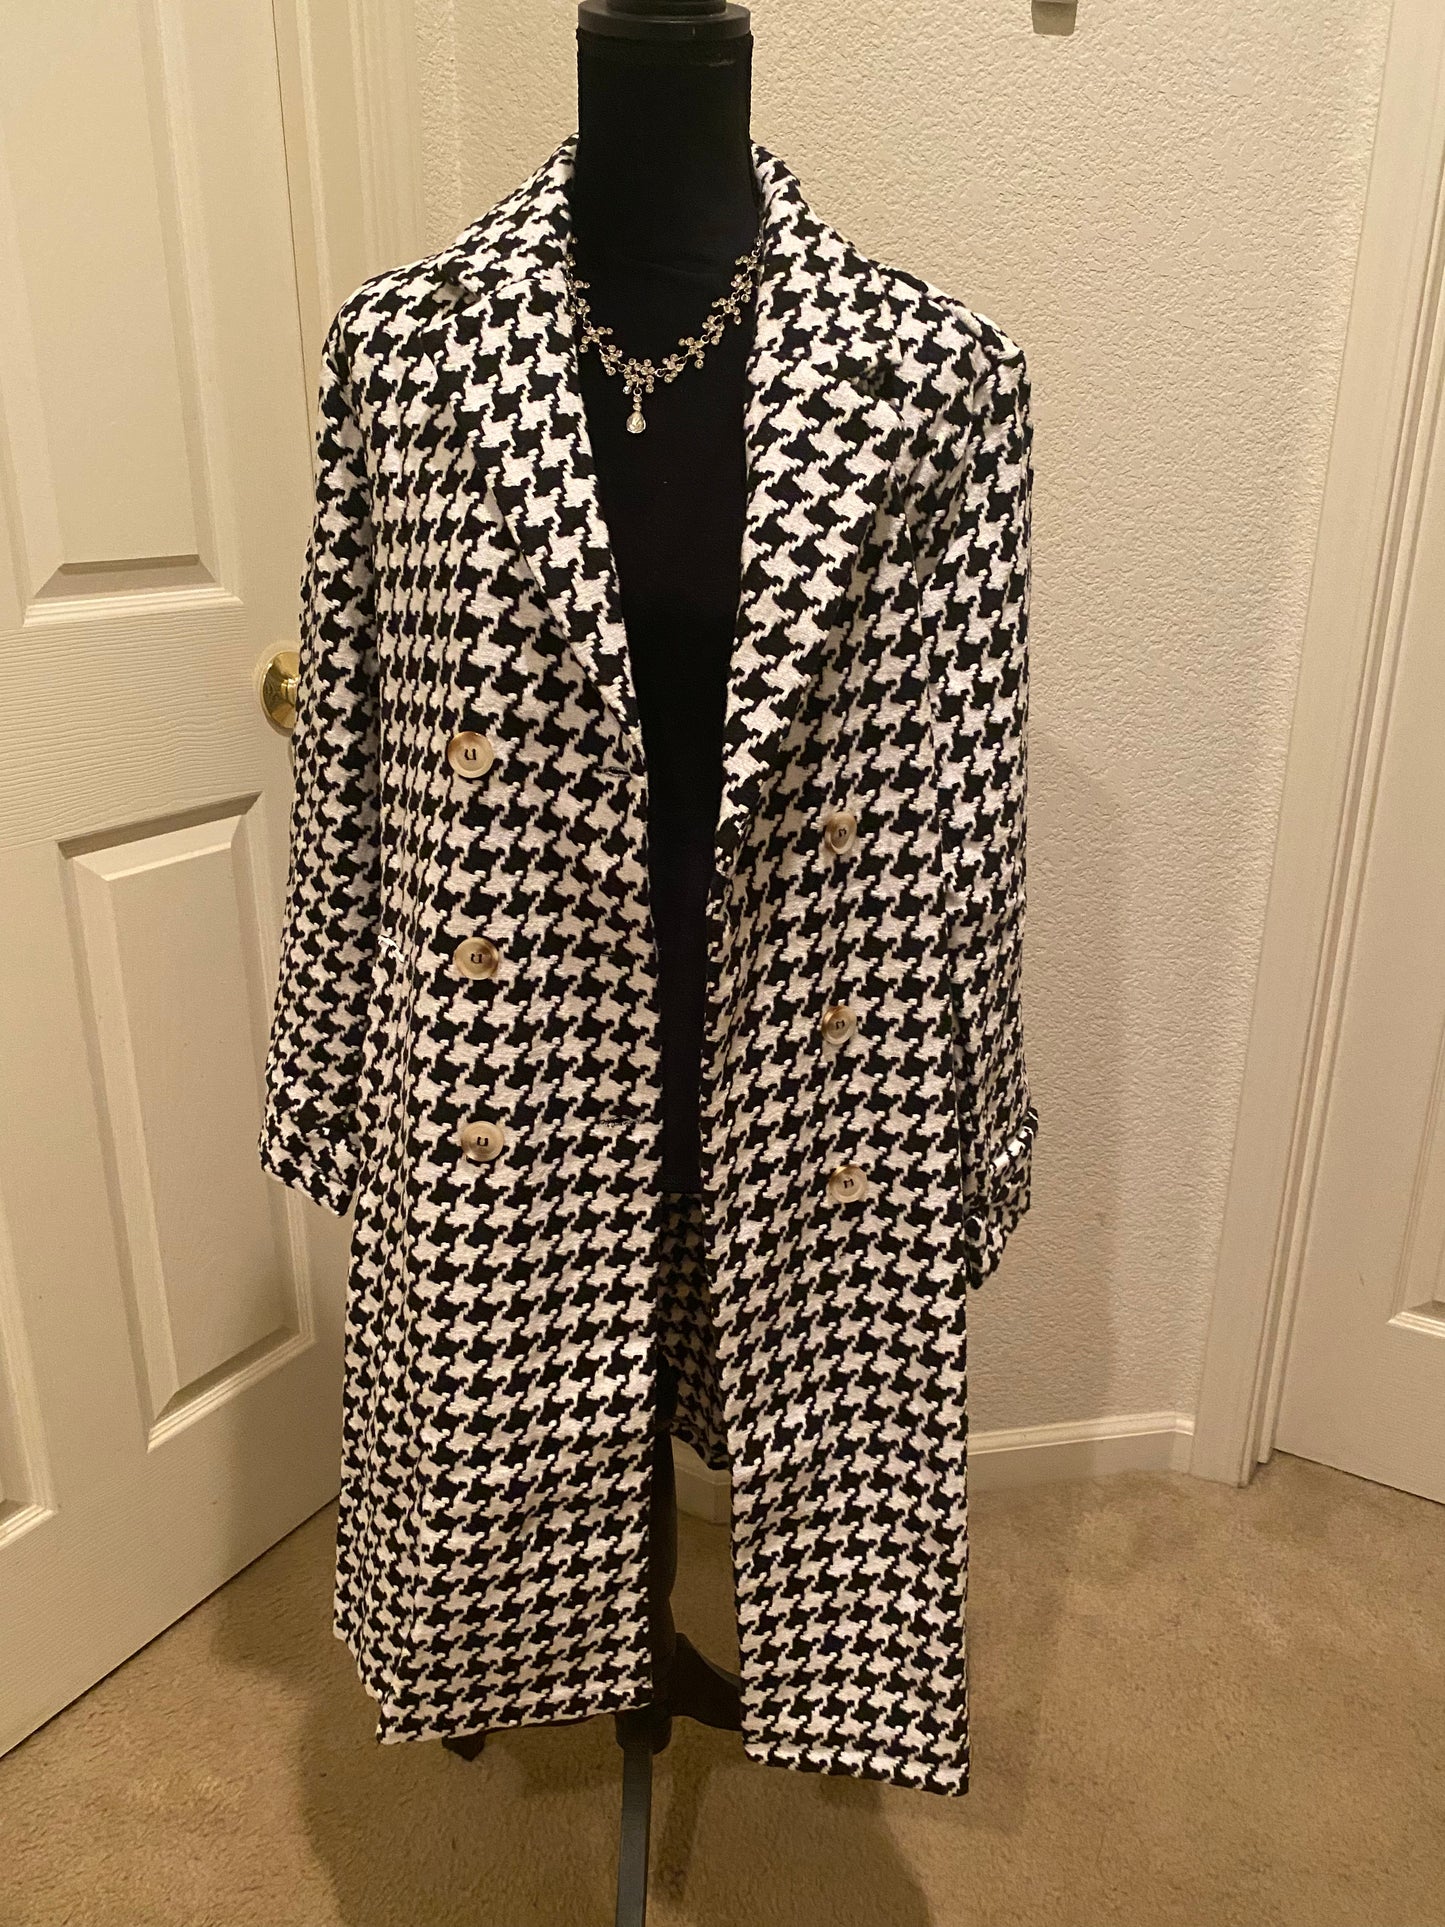 HOUNDSTOOTH BUCKLE LAPEL COLLAR FASHION COAT, Sizes XSmall - Large